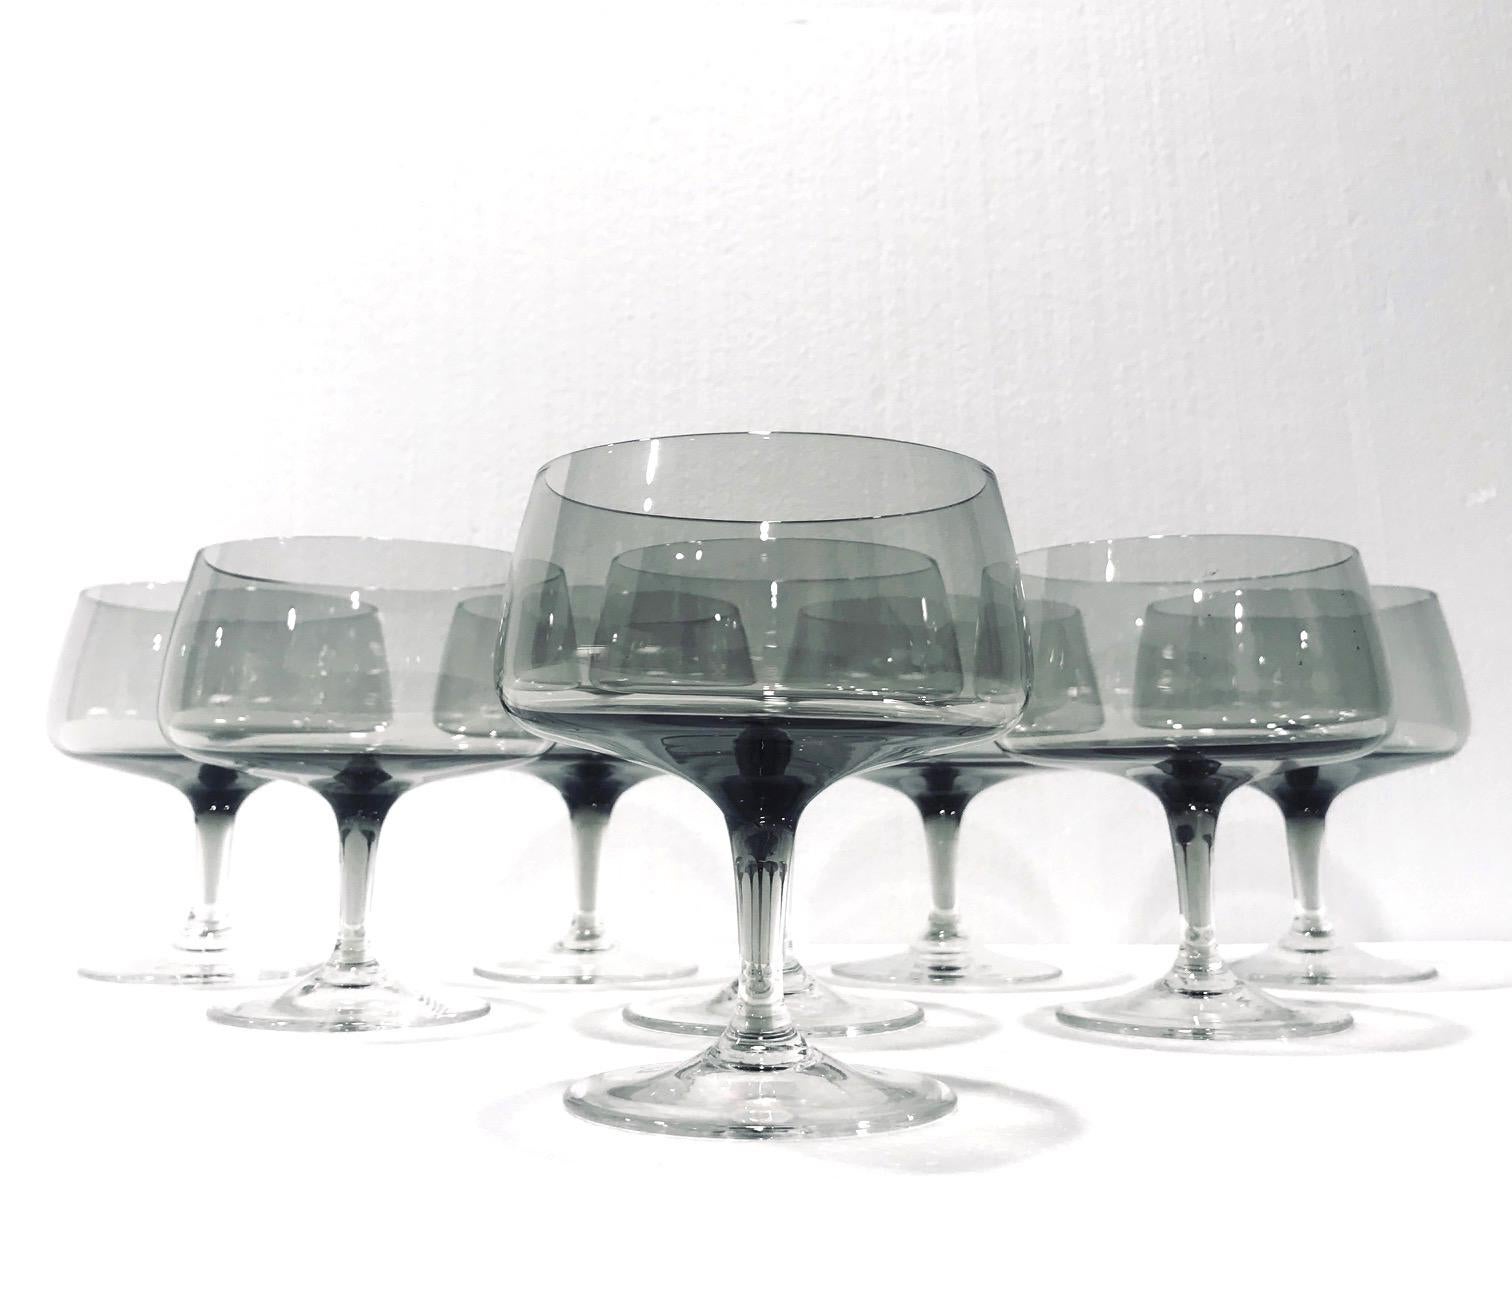 Set of seven Mid-Century Modern hand blown crystal champagne glasses in smoked grey. The glasses feature stylized bulbous saucer with narrow tapered stems and circular bases. This uber chic glasses make a beautiful addition to any barware or